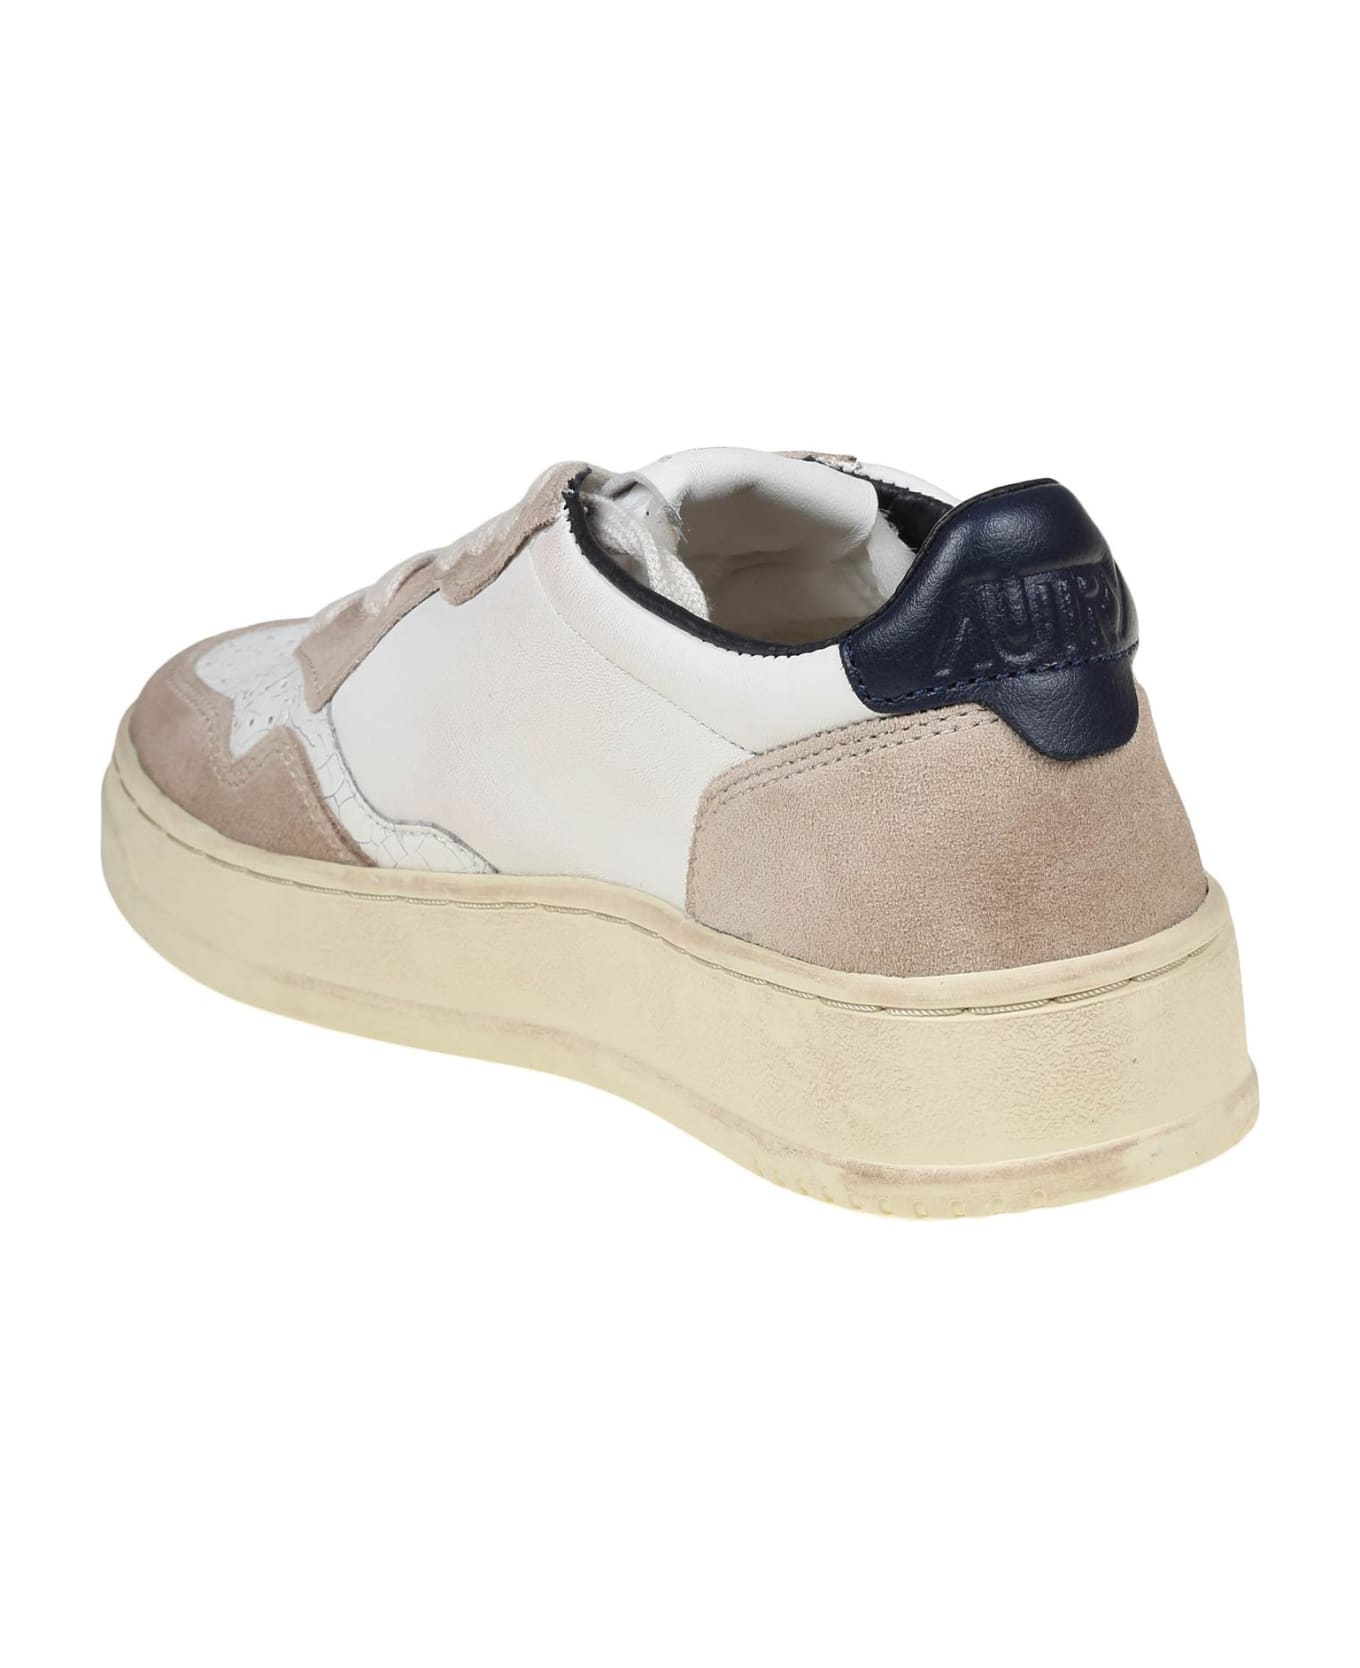 Autry Sneakers In White And Blue Leather - white/blue